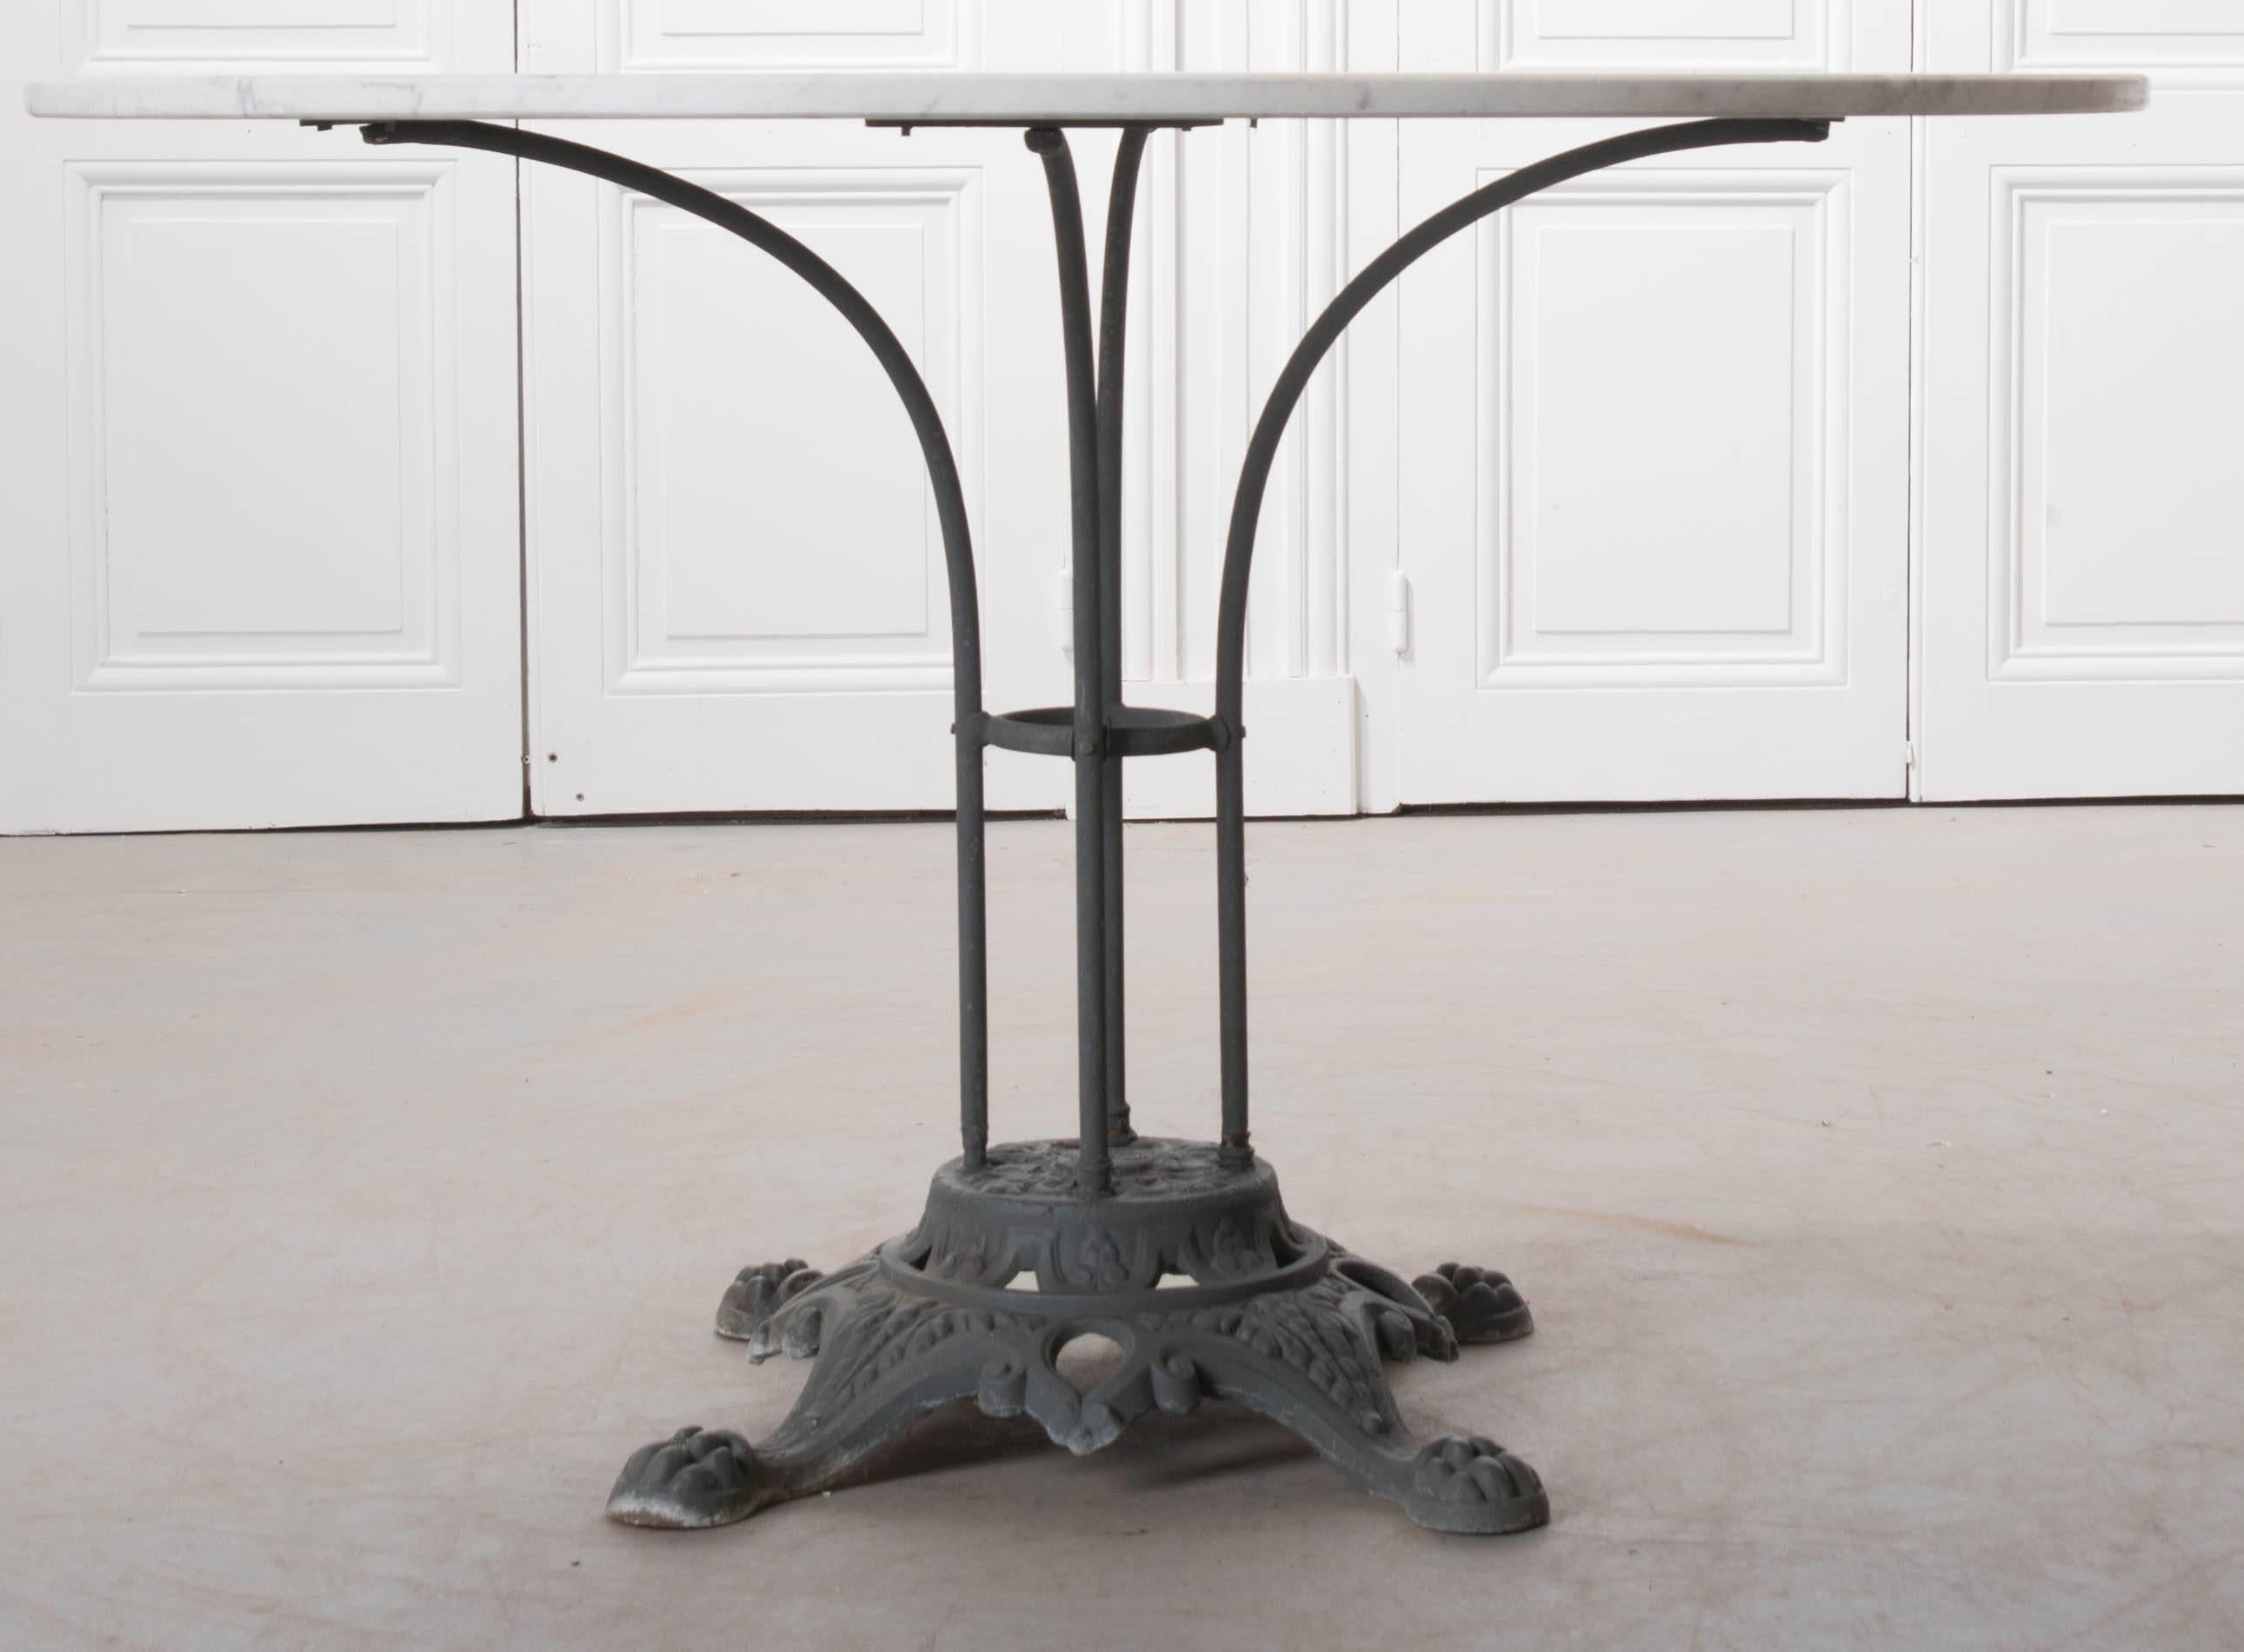 A wonderful cast iron garden table with white marble top from early 20th century, France. The table has a cast iron pedestal base, with four paw feet adding to the styling of this iron foundation. From this extend four tubular, vertical iron